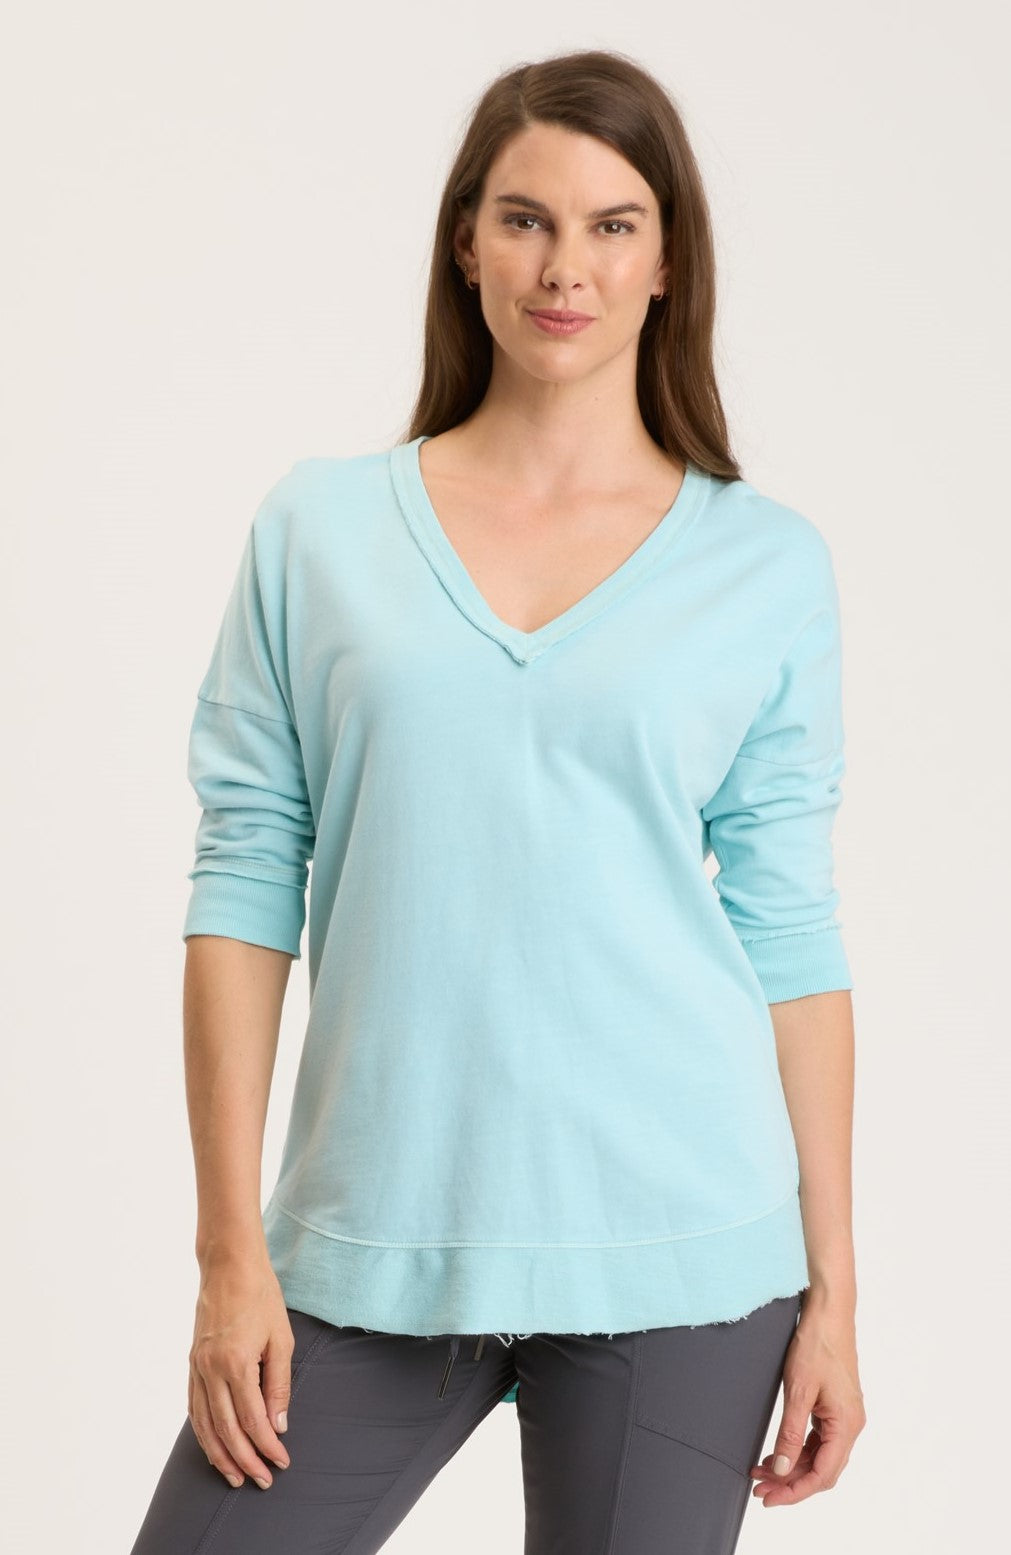 Terry Fira Pullover by Wearables in Mermaid Tail